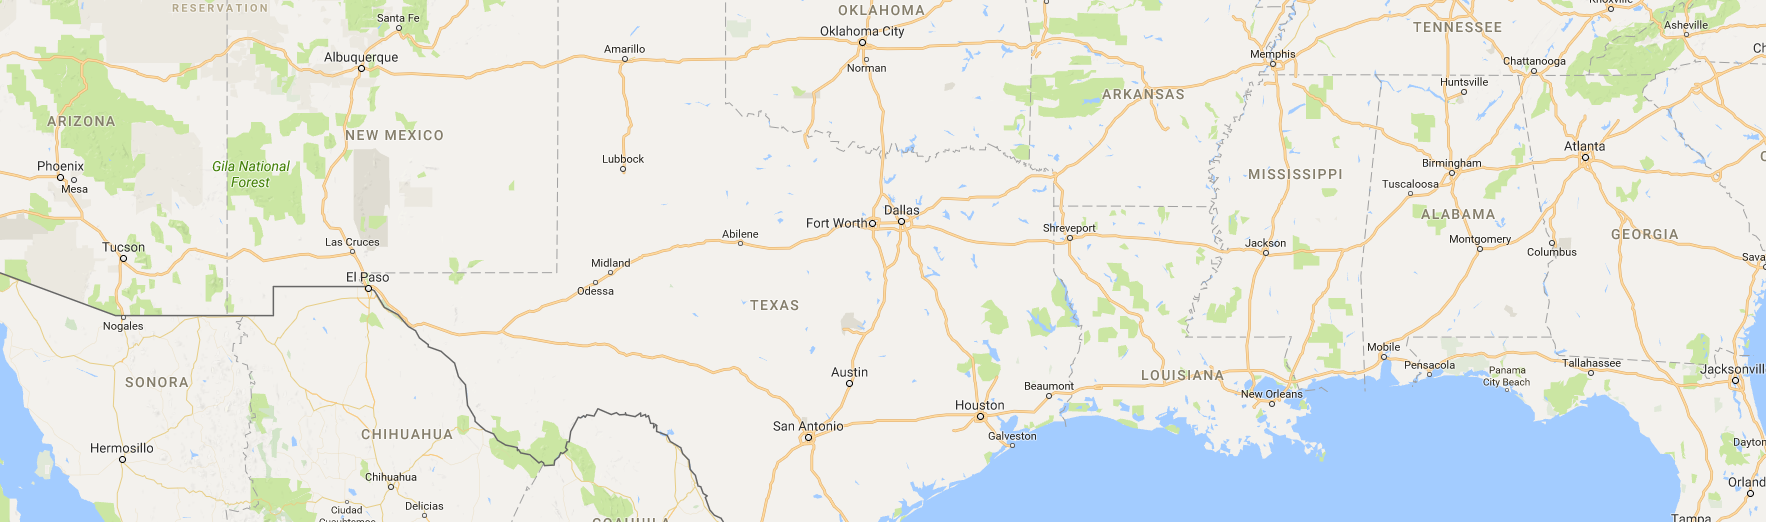 Texas and southern United States